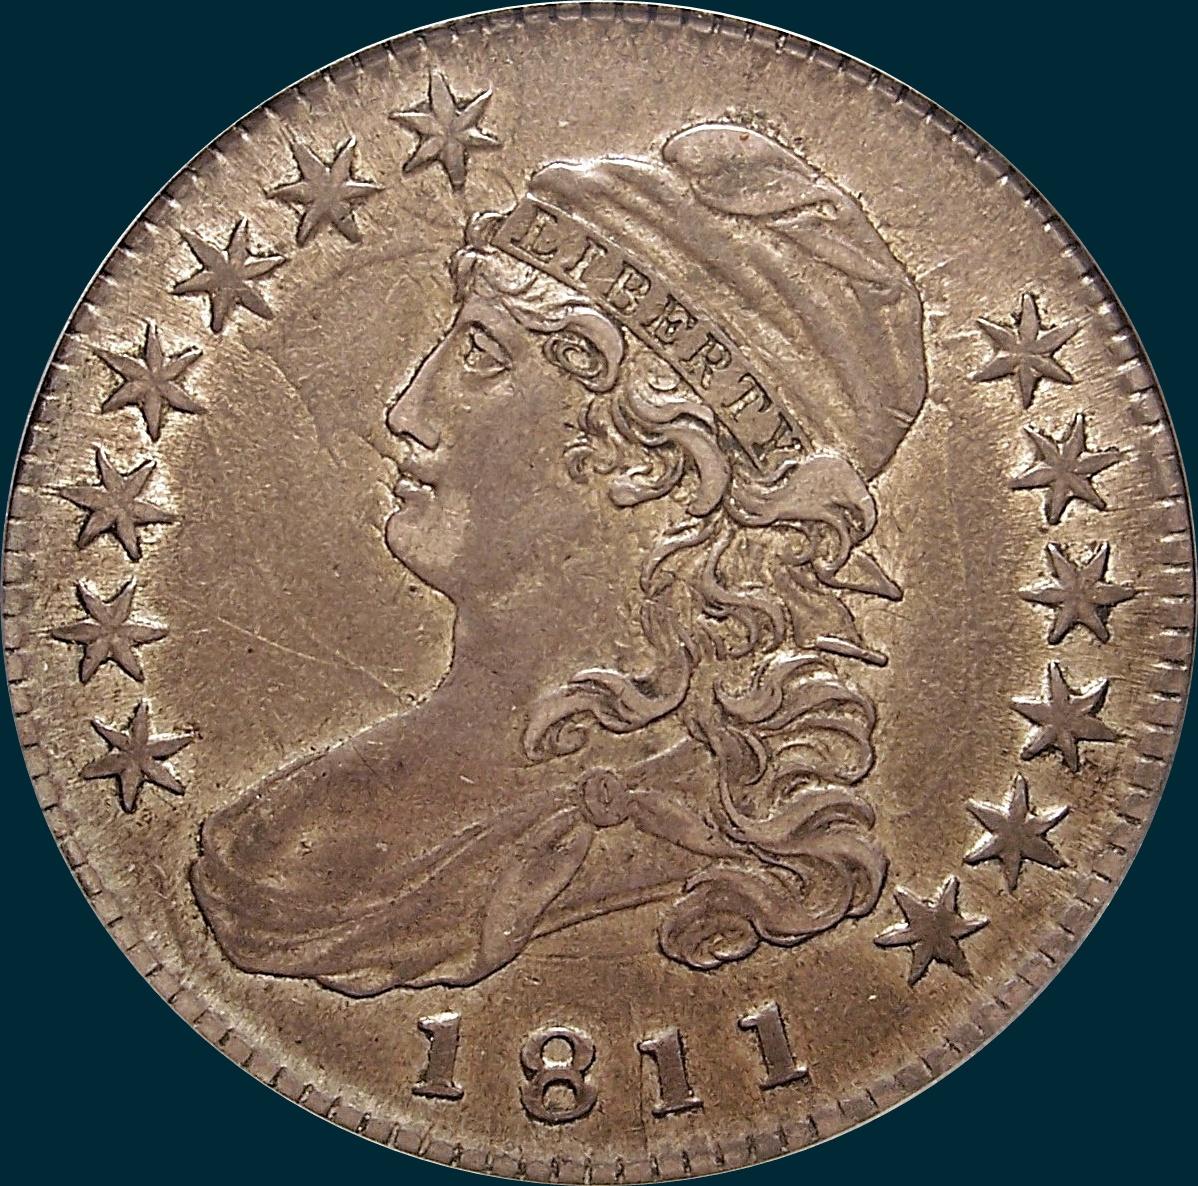 1811, O-103, Large 8, Capped Bust, Half Dollar